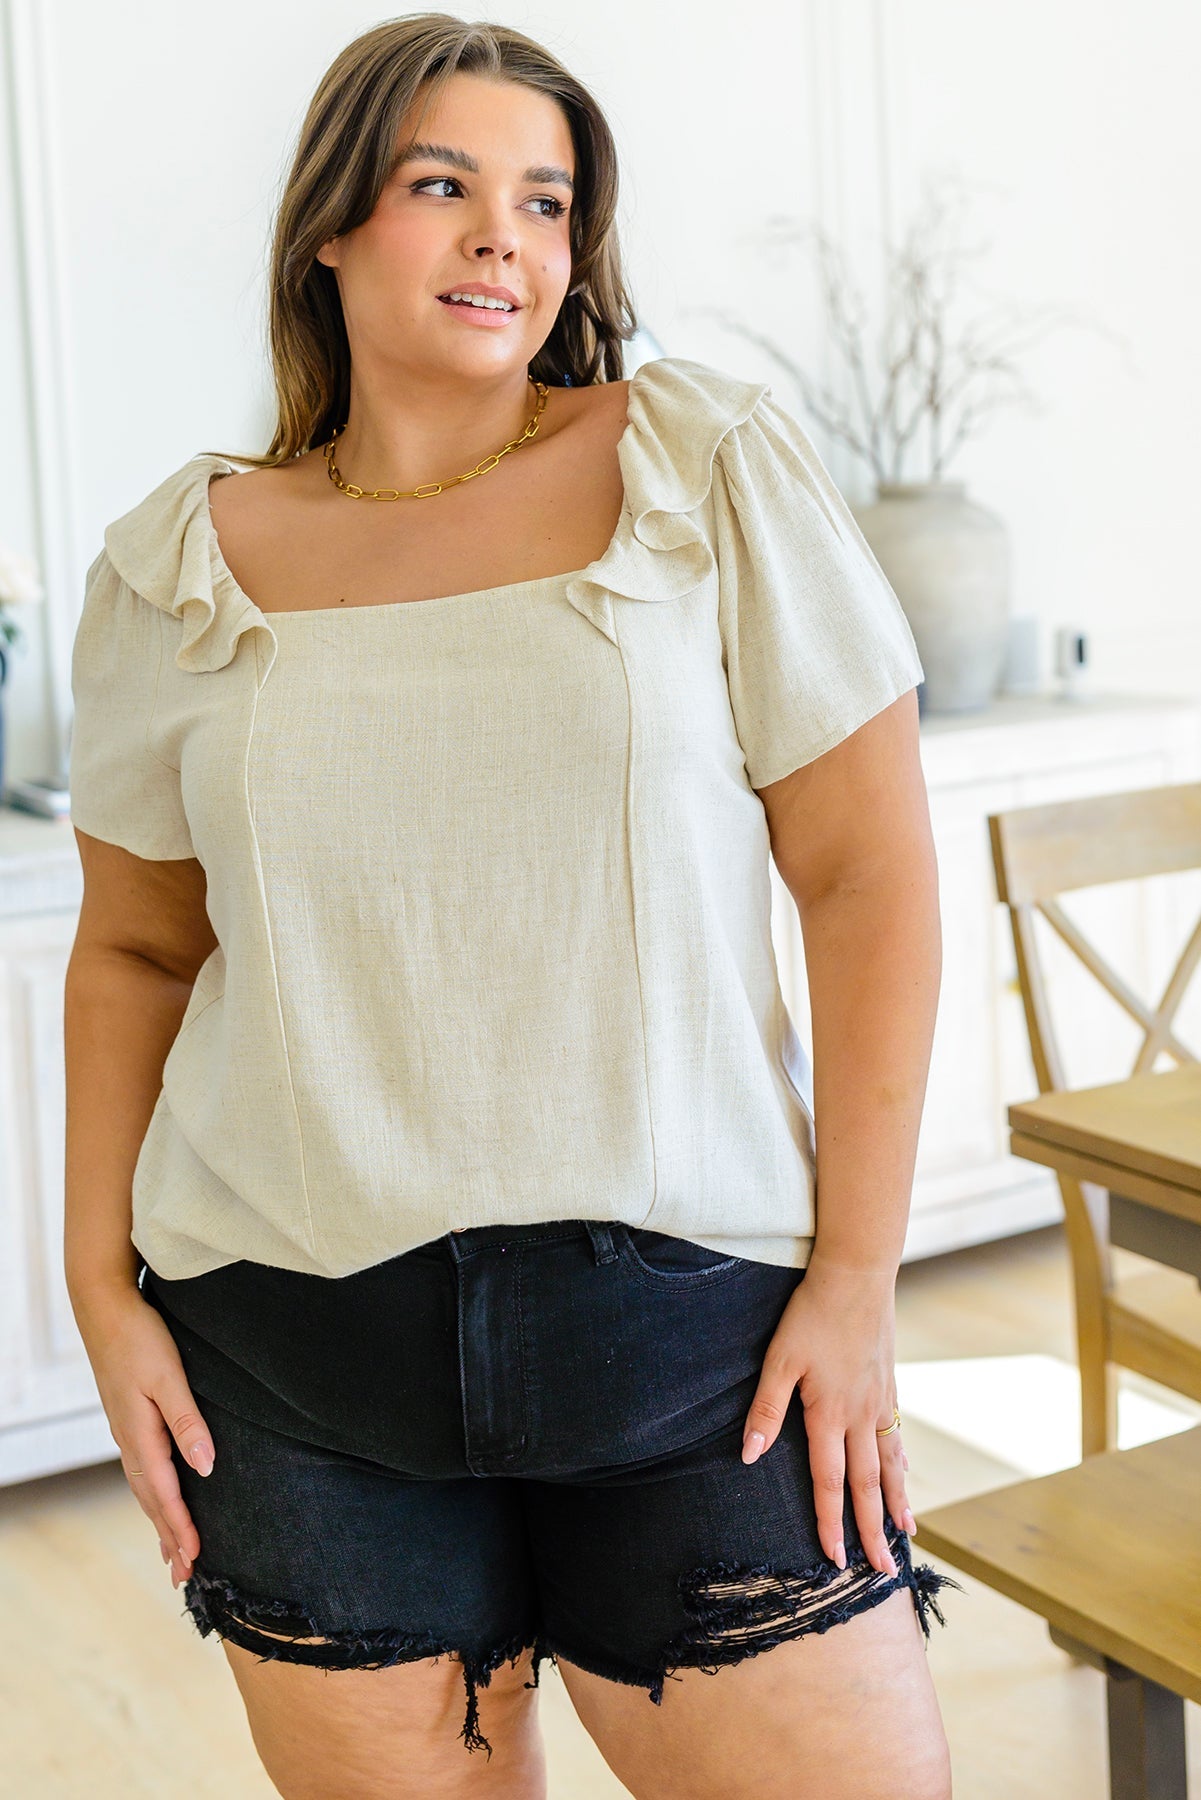 The Old Town Moments Top is so simple yet cute and will pair well with any bottoms! The square neckline and ruffle detail at the shoulders gives this top a feminine yet classy element. We promise you're going to love it! S - 3X